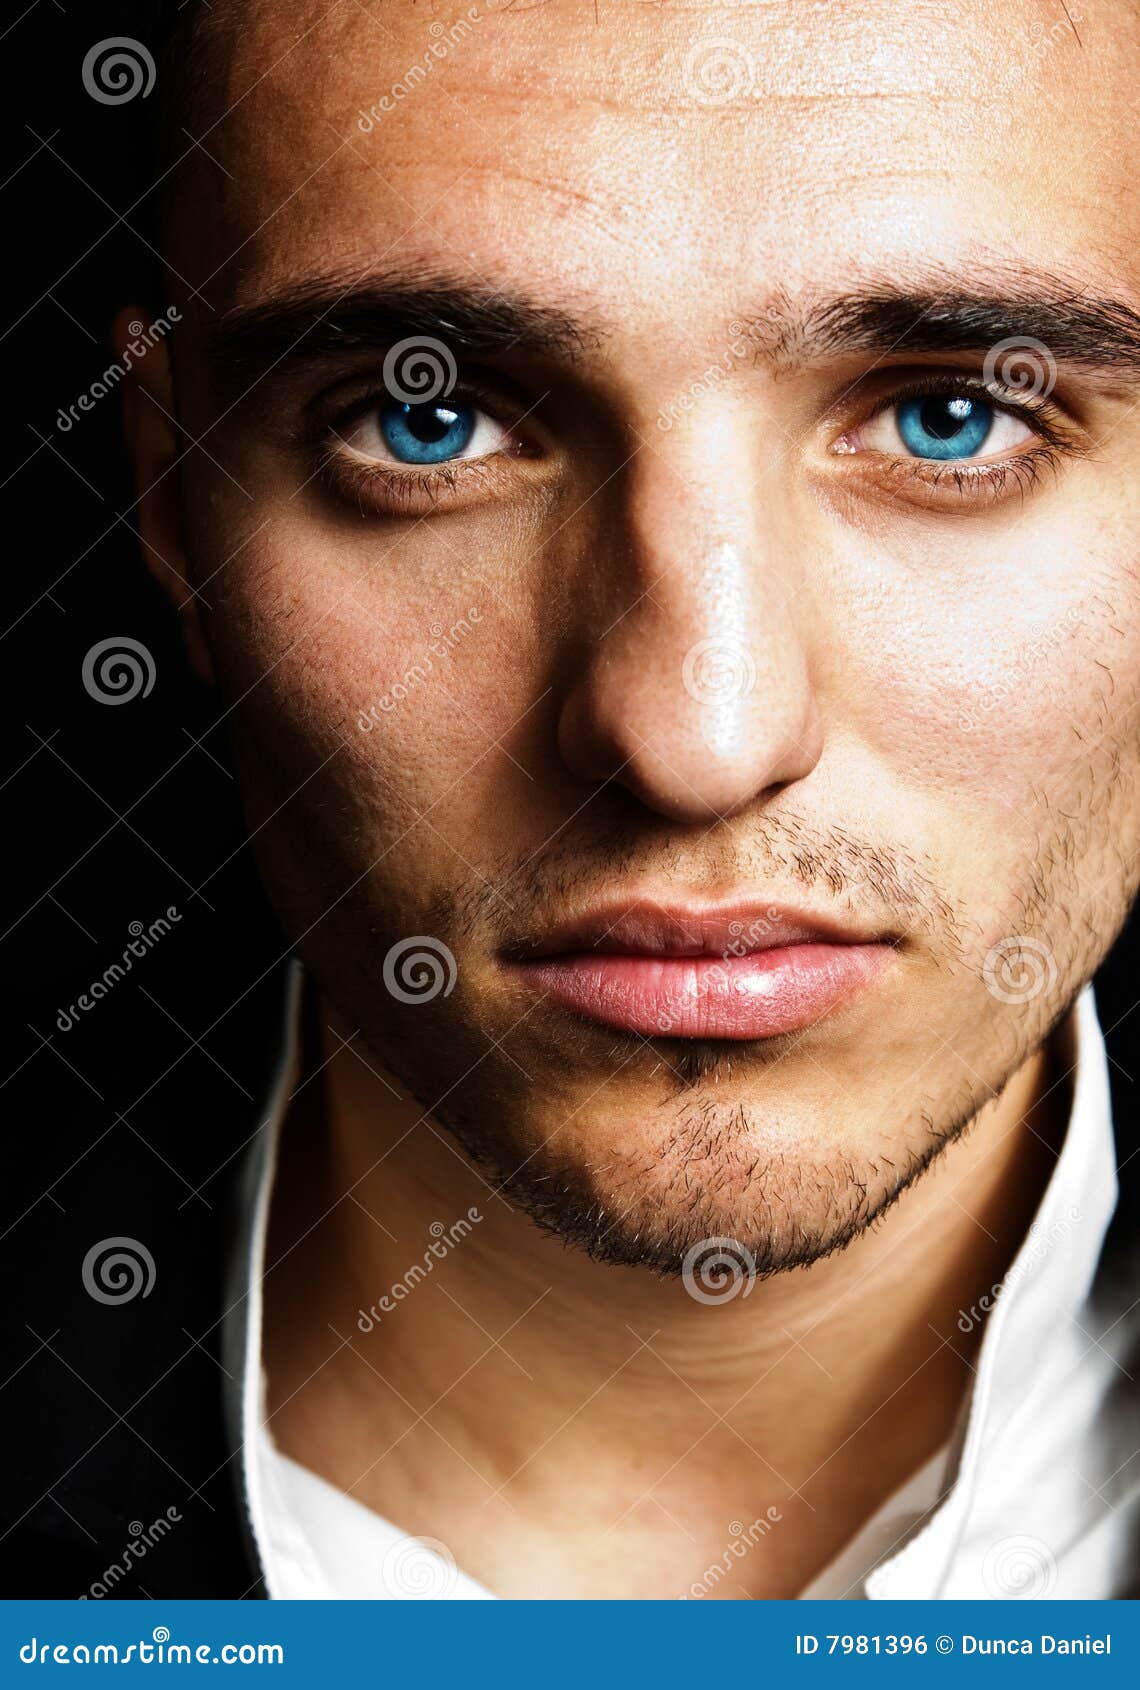 Blue Eyes Man Images – Browse 174,683 Stock Photos, Vectors, and